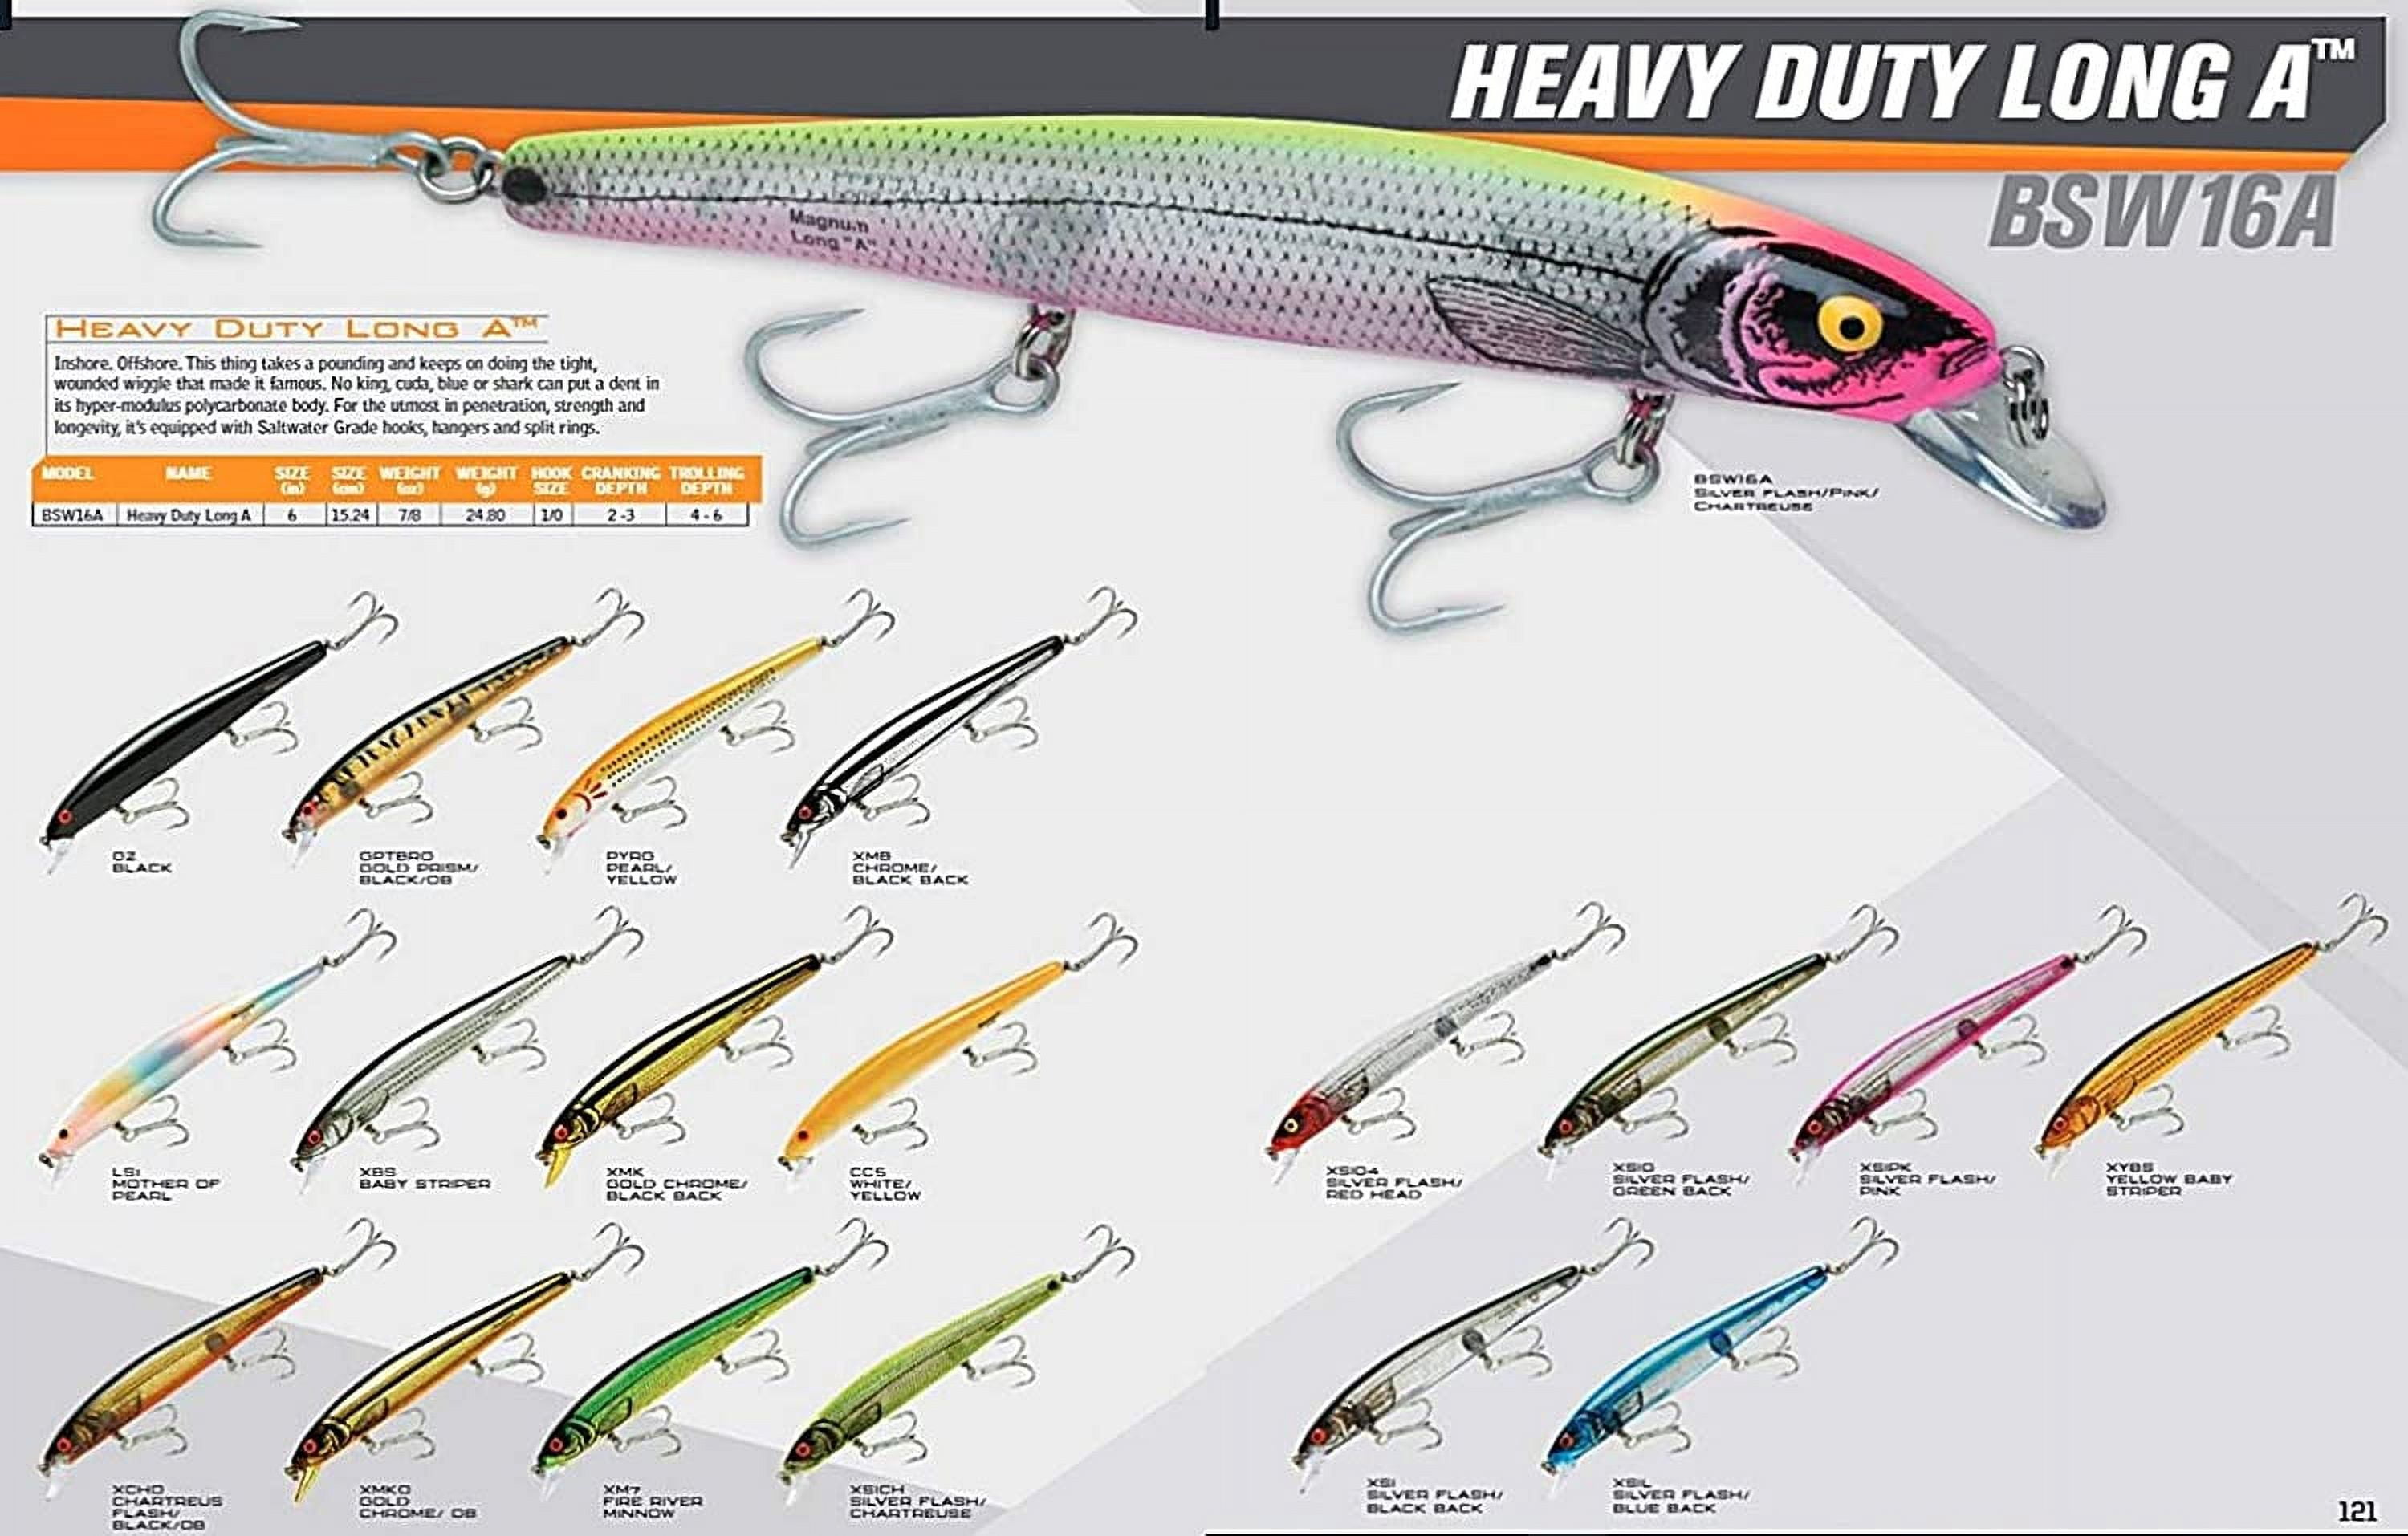 Lures Long A Slender Minnow Jerbait Fishing Lure 海外 即決 - スキル、知識